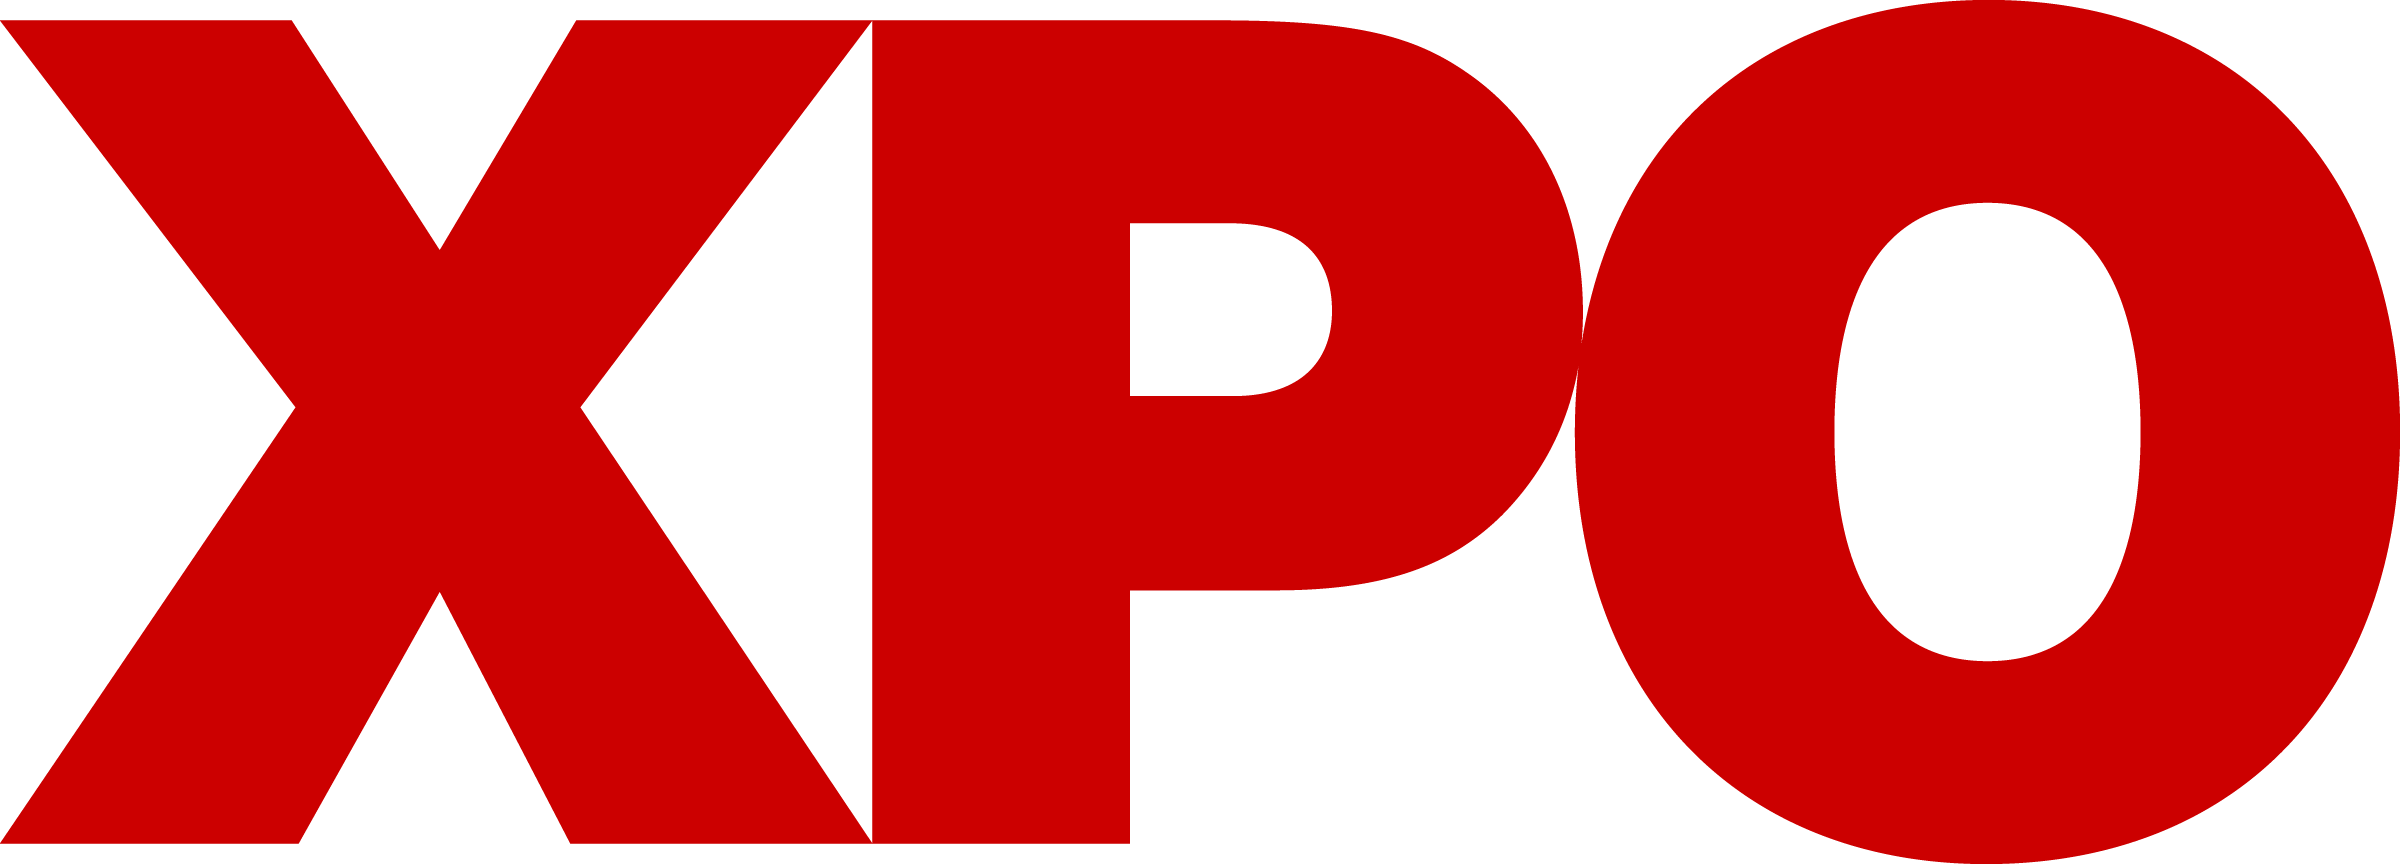 XPO Schedules Second Quarter 2023 Earnings Conference Call for Friday, August 4, 2023 378aec62-5d02-4947-a49f-6b239fc7402d?size=1